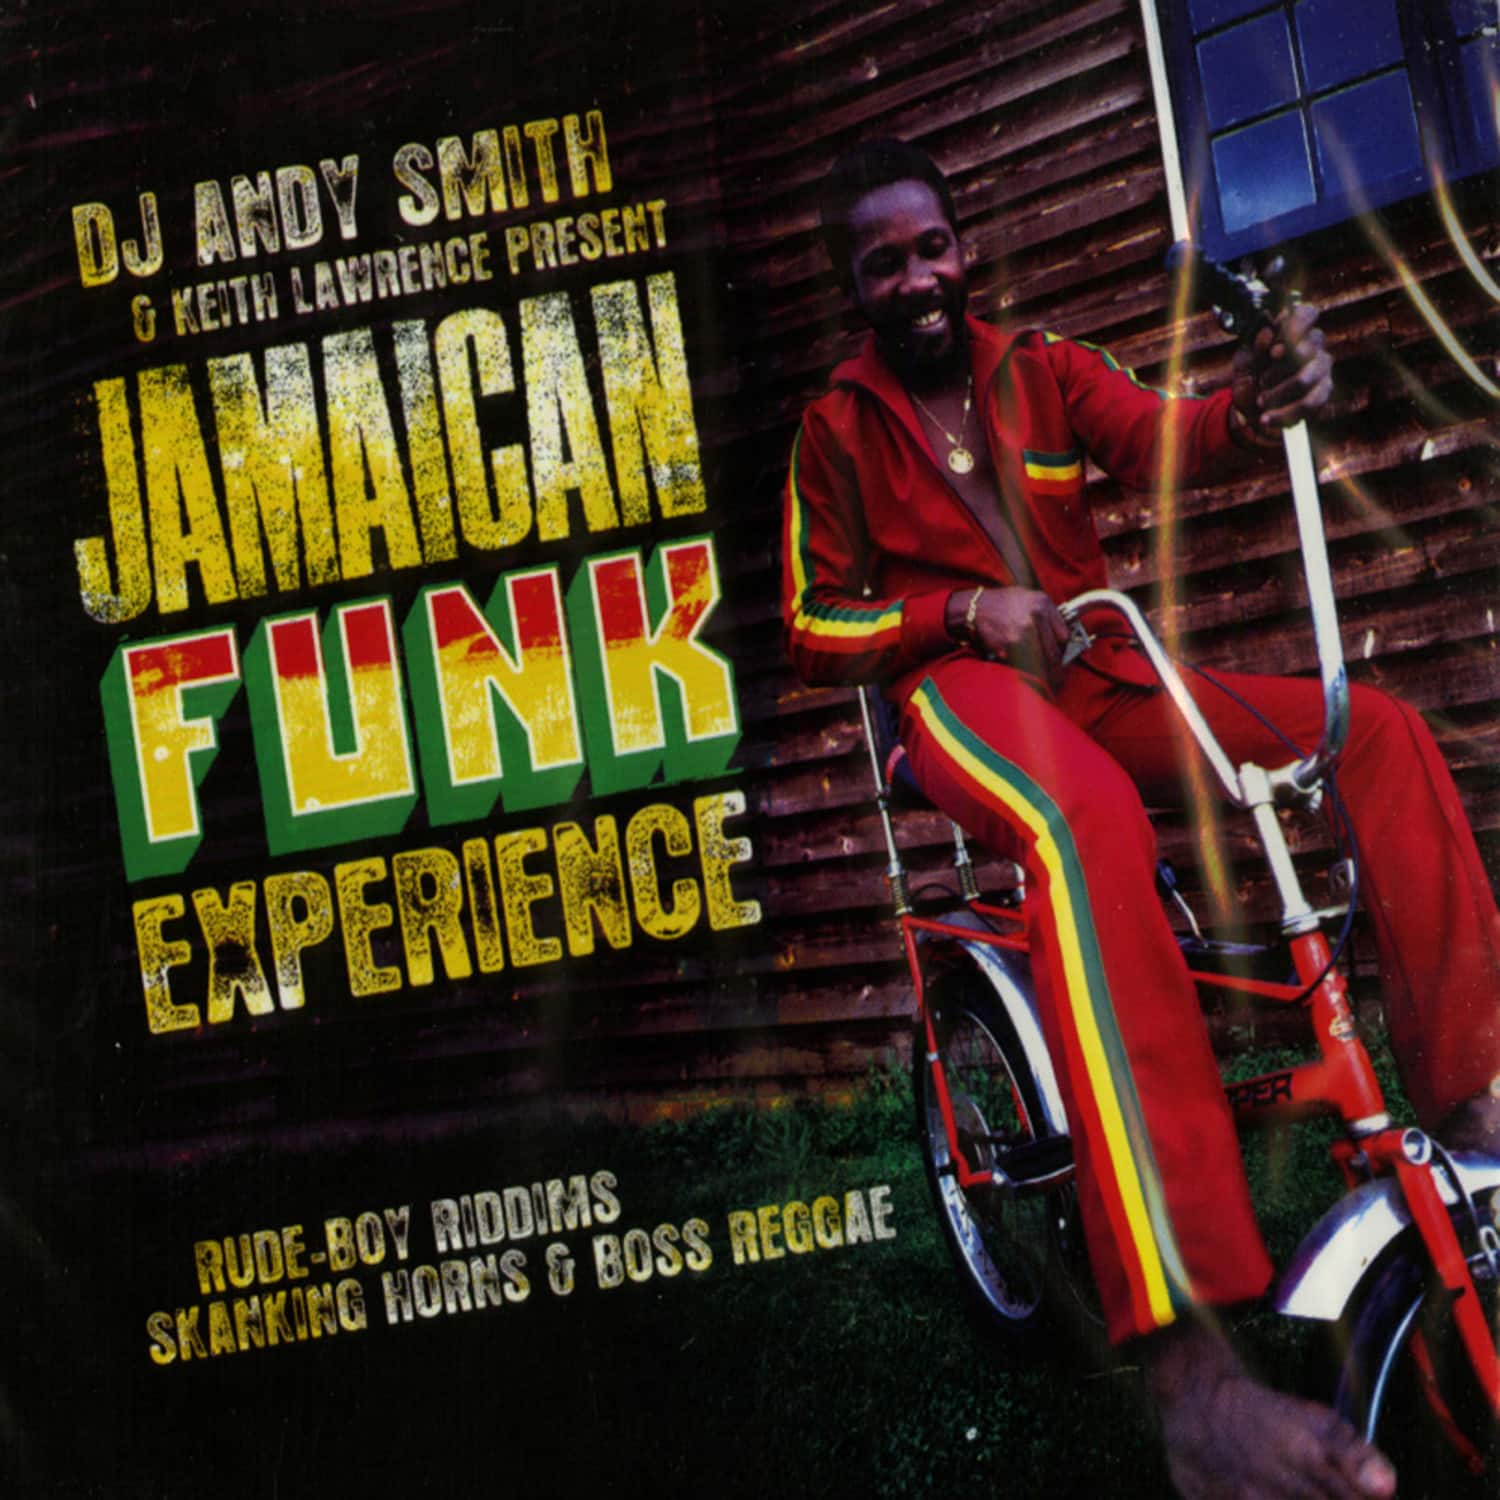 Dj Andy Smith & Keith Lawrence pres - JAMAICAN FUNK EXPERIENCE 